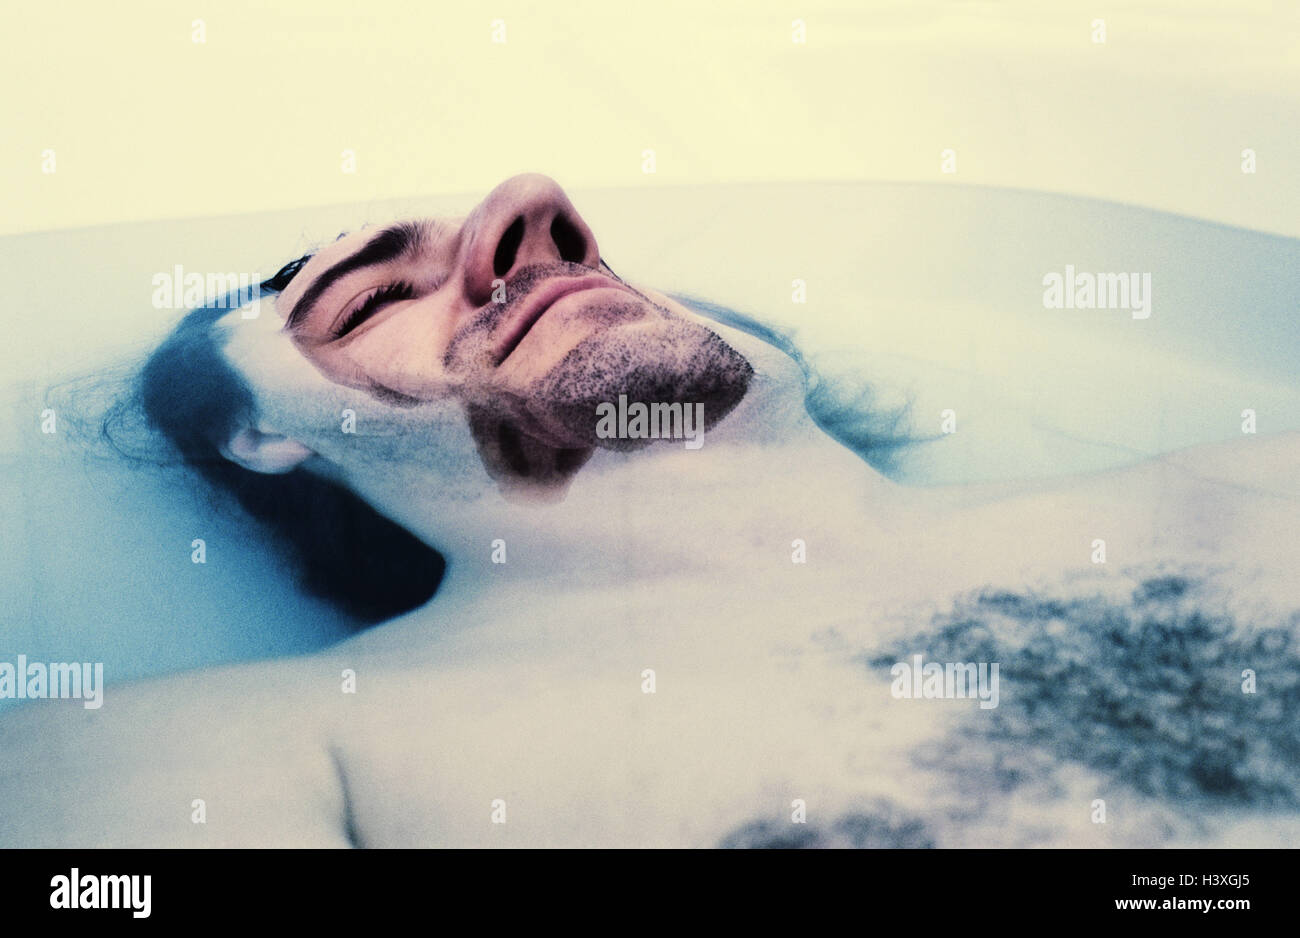 Man, bath, relaxing, take it easy, model released, bath, have of a bath, hygiene, personal care, consumption, enjoy, pleasant sensation, well-being, ease, recreation, rest, water, dives, detail, very close Stock Photo